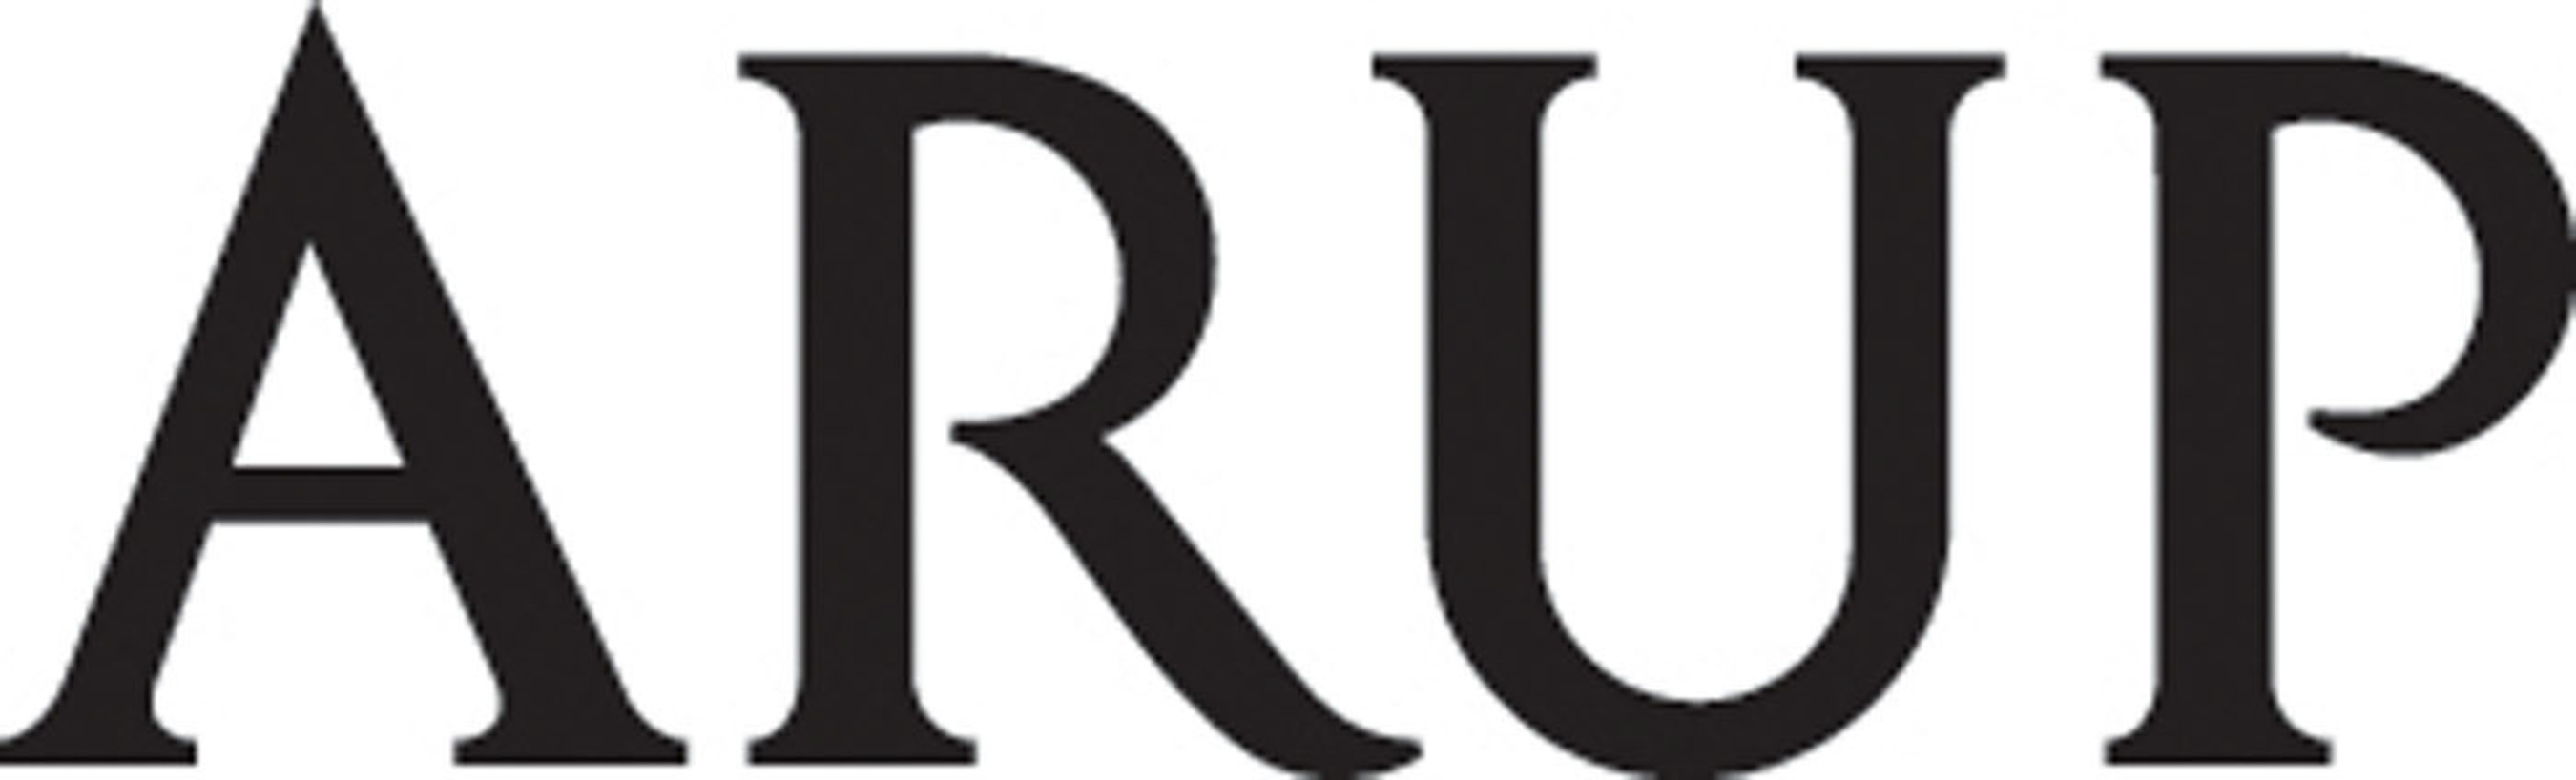 Arup, a multidisciplinary engineering and consulting firm with a reputation for delivering innovative and sustainable designs.